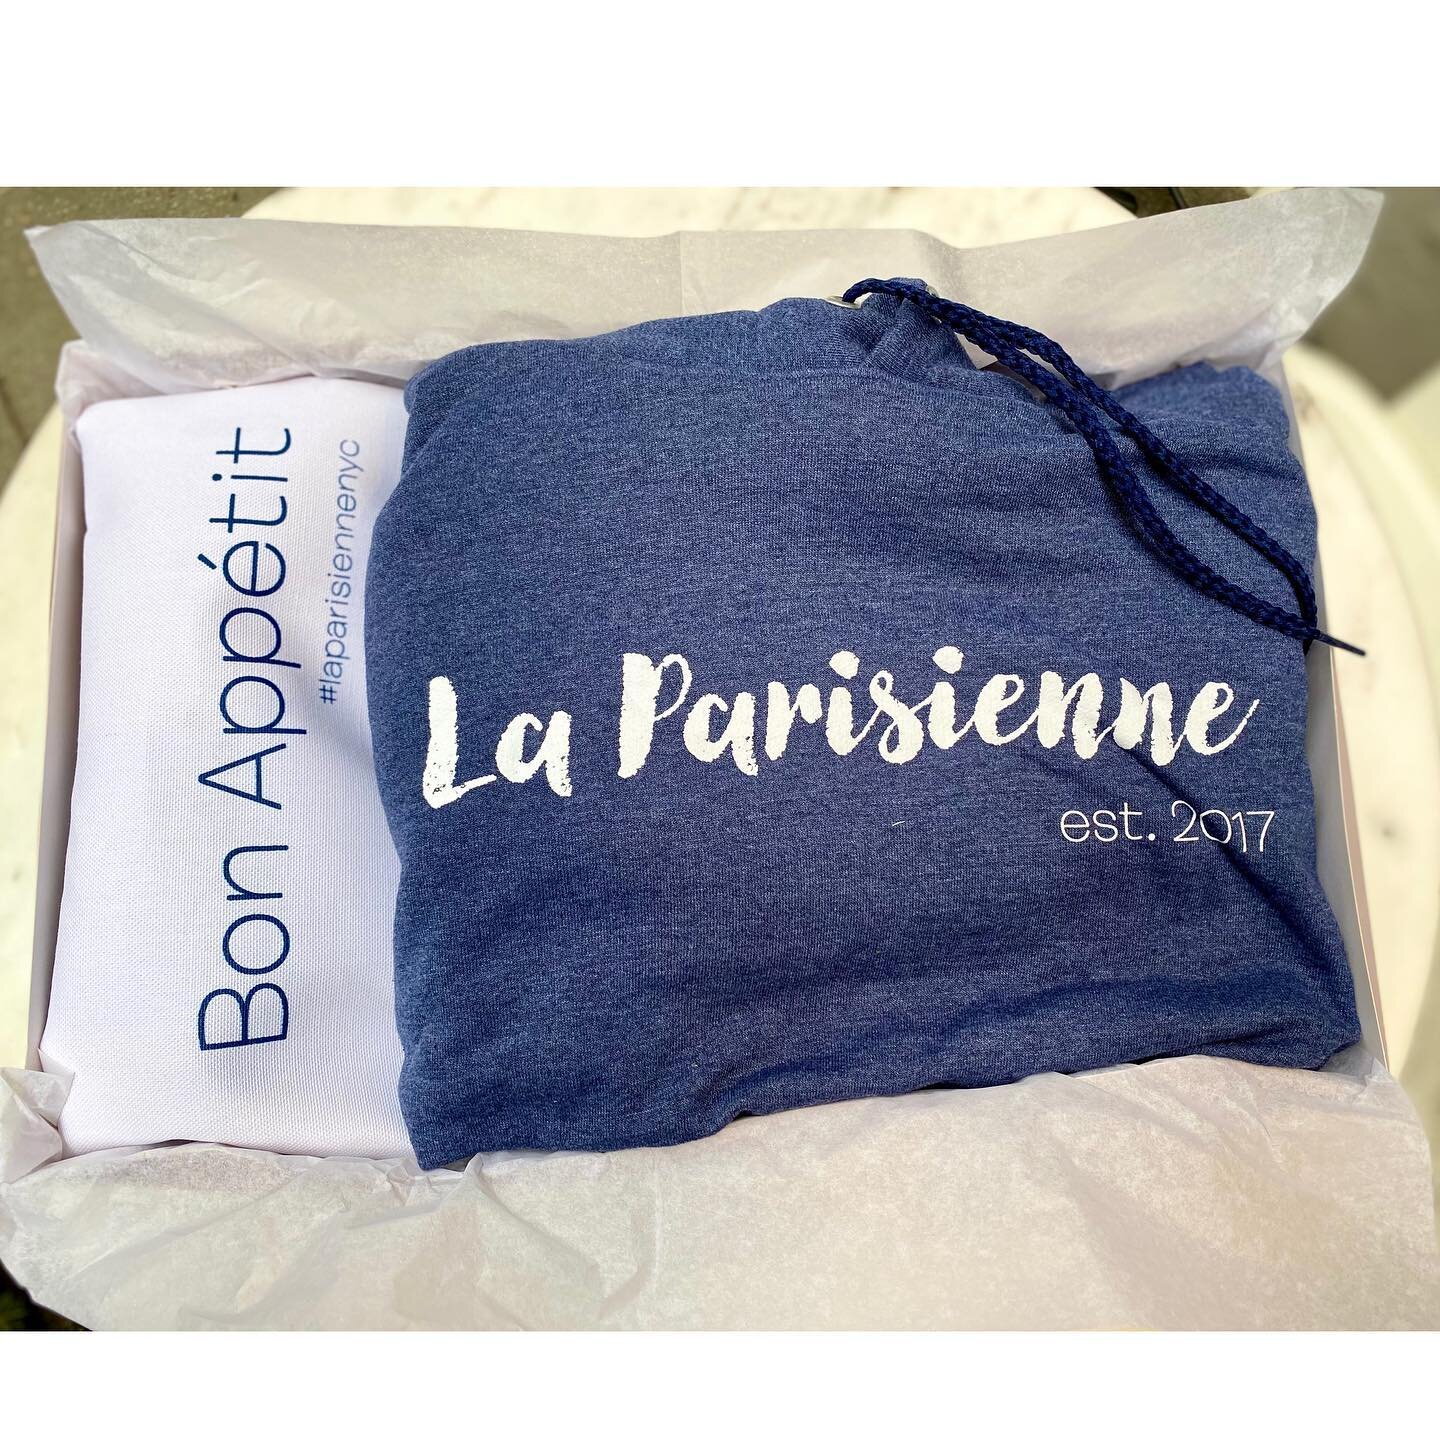 La Parisienne is giving away a GIFT BOX ( 1 hoodie + 1 tote bag) to 1 lucky client! #laparisienne #frenchcaf&eacute; #fidi #downtownnyc